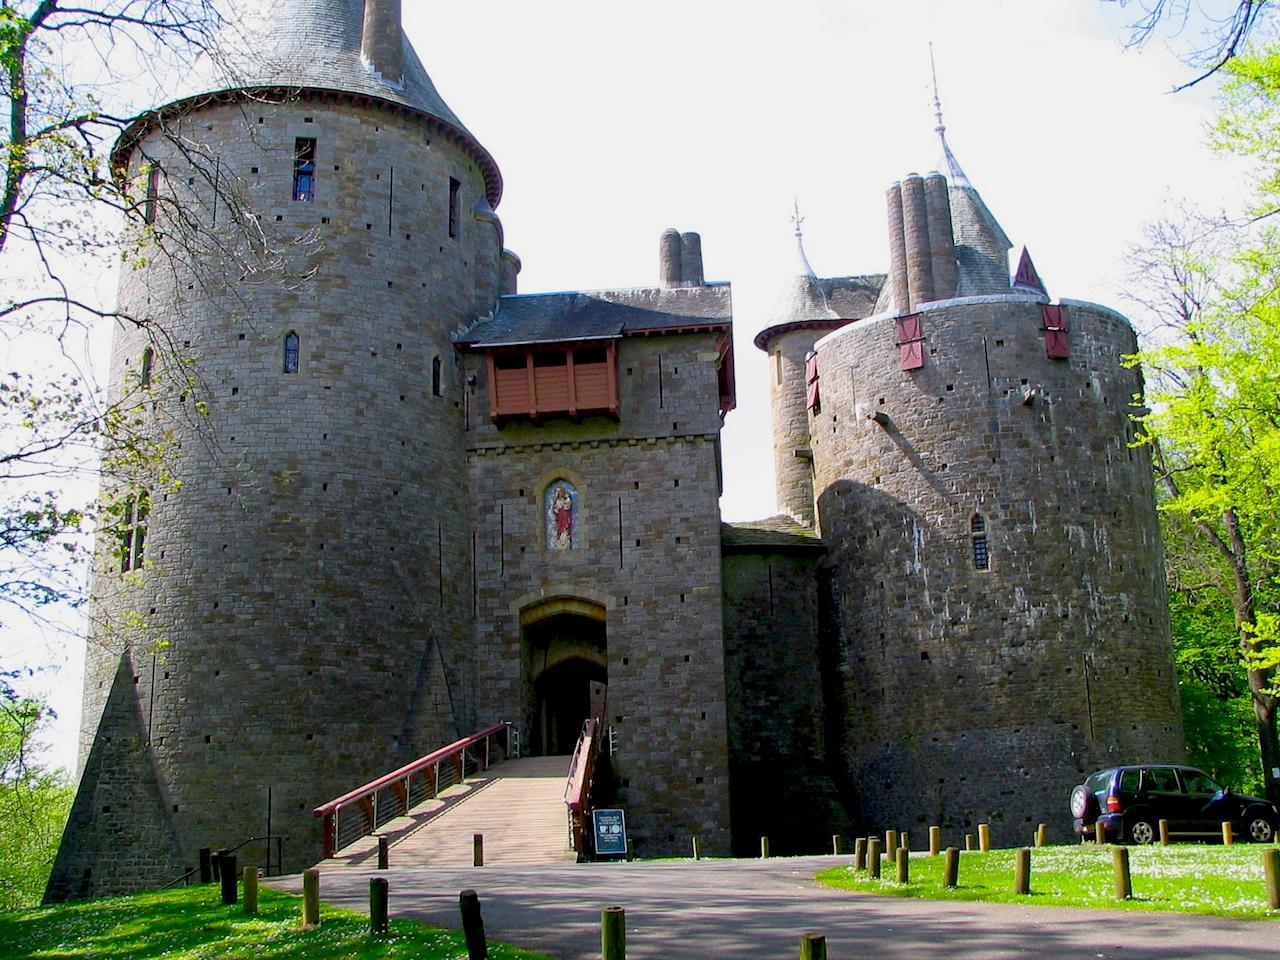 Cover image of this place Castell Coch